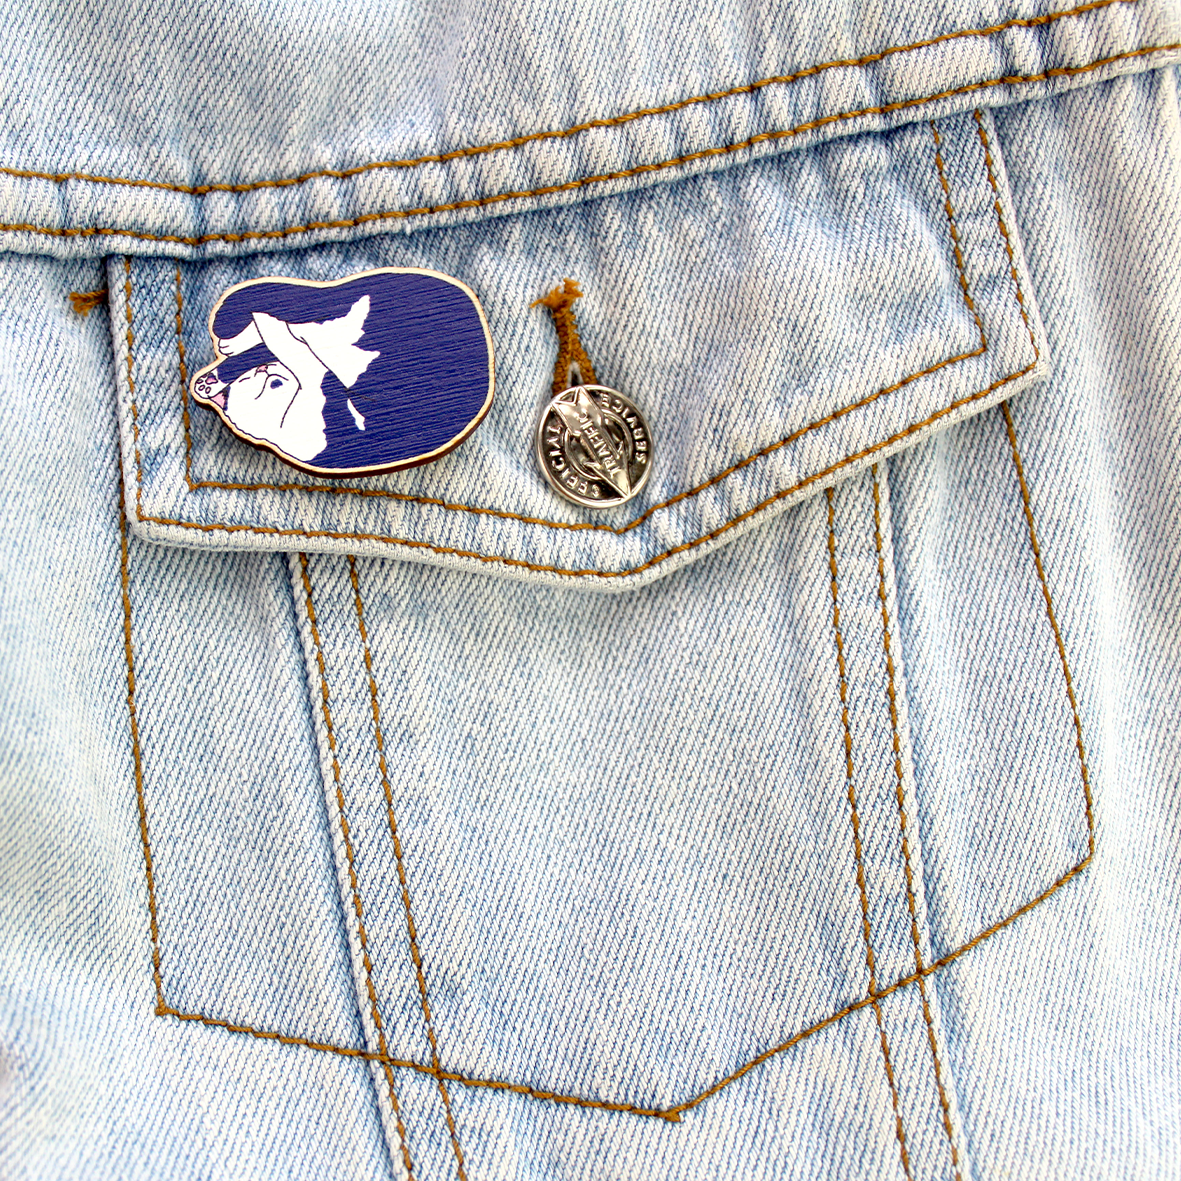 The blue and white cute cat wooden pin badge is shown attached to a denim jacket pocket